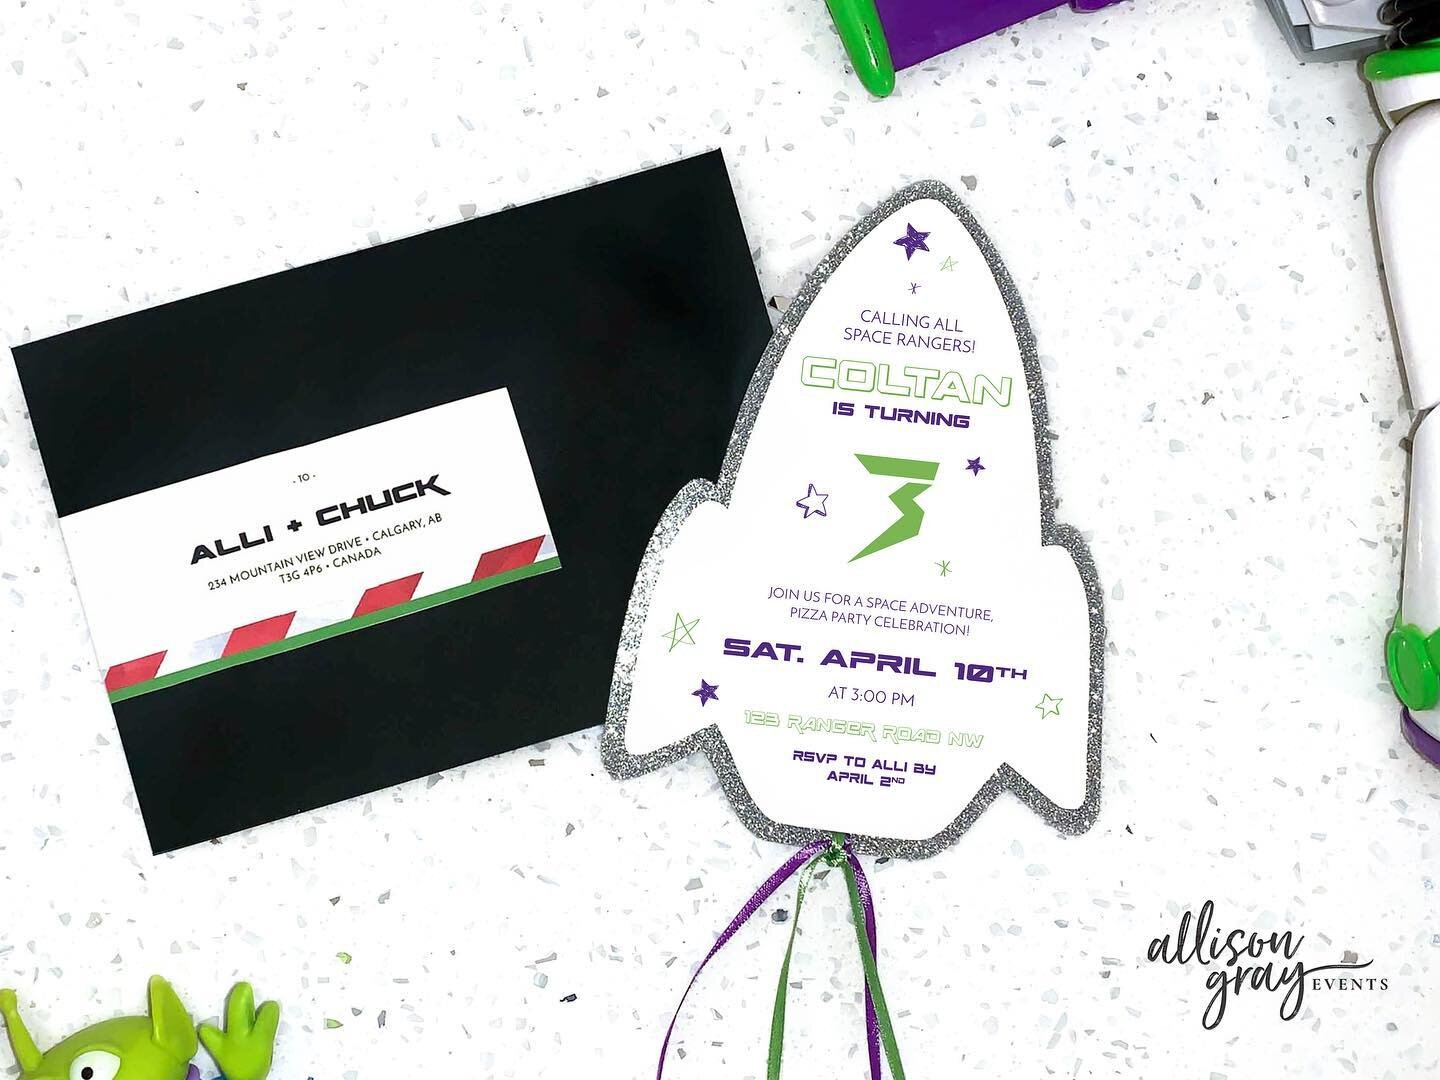 Etsy Shop! 🎉

To infinity and beyond!! Check out these cute printables we made to match our Buzz themed party💜

Design: @allisongrayevents
.
.
.
.
#allisongrayevents #calgarybuzz #yyc #canada #mycreativebiz #eventplanner #eventplanning #eventstylin